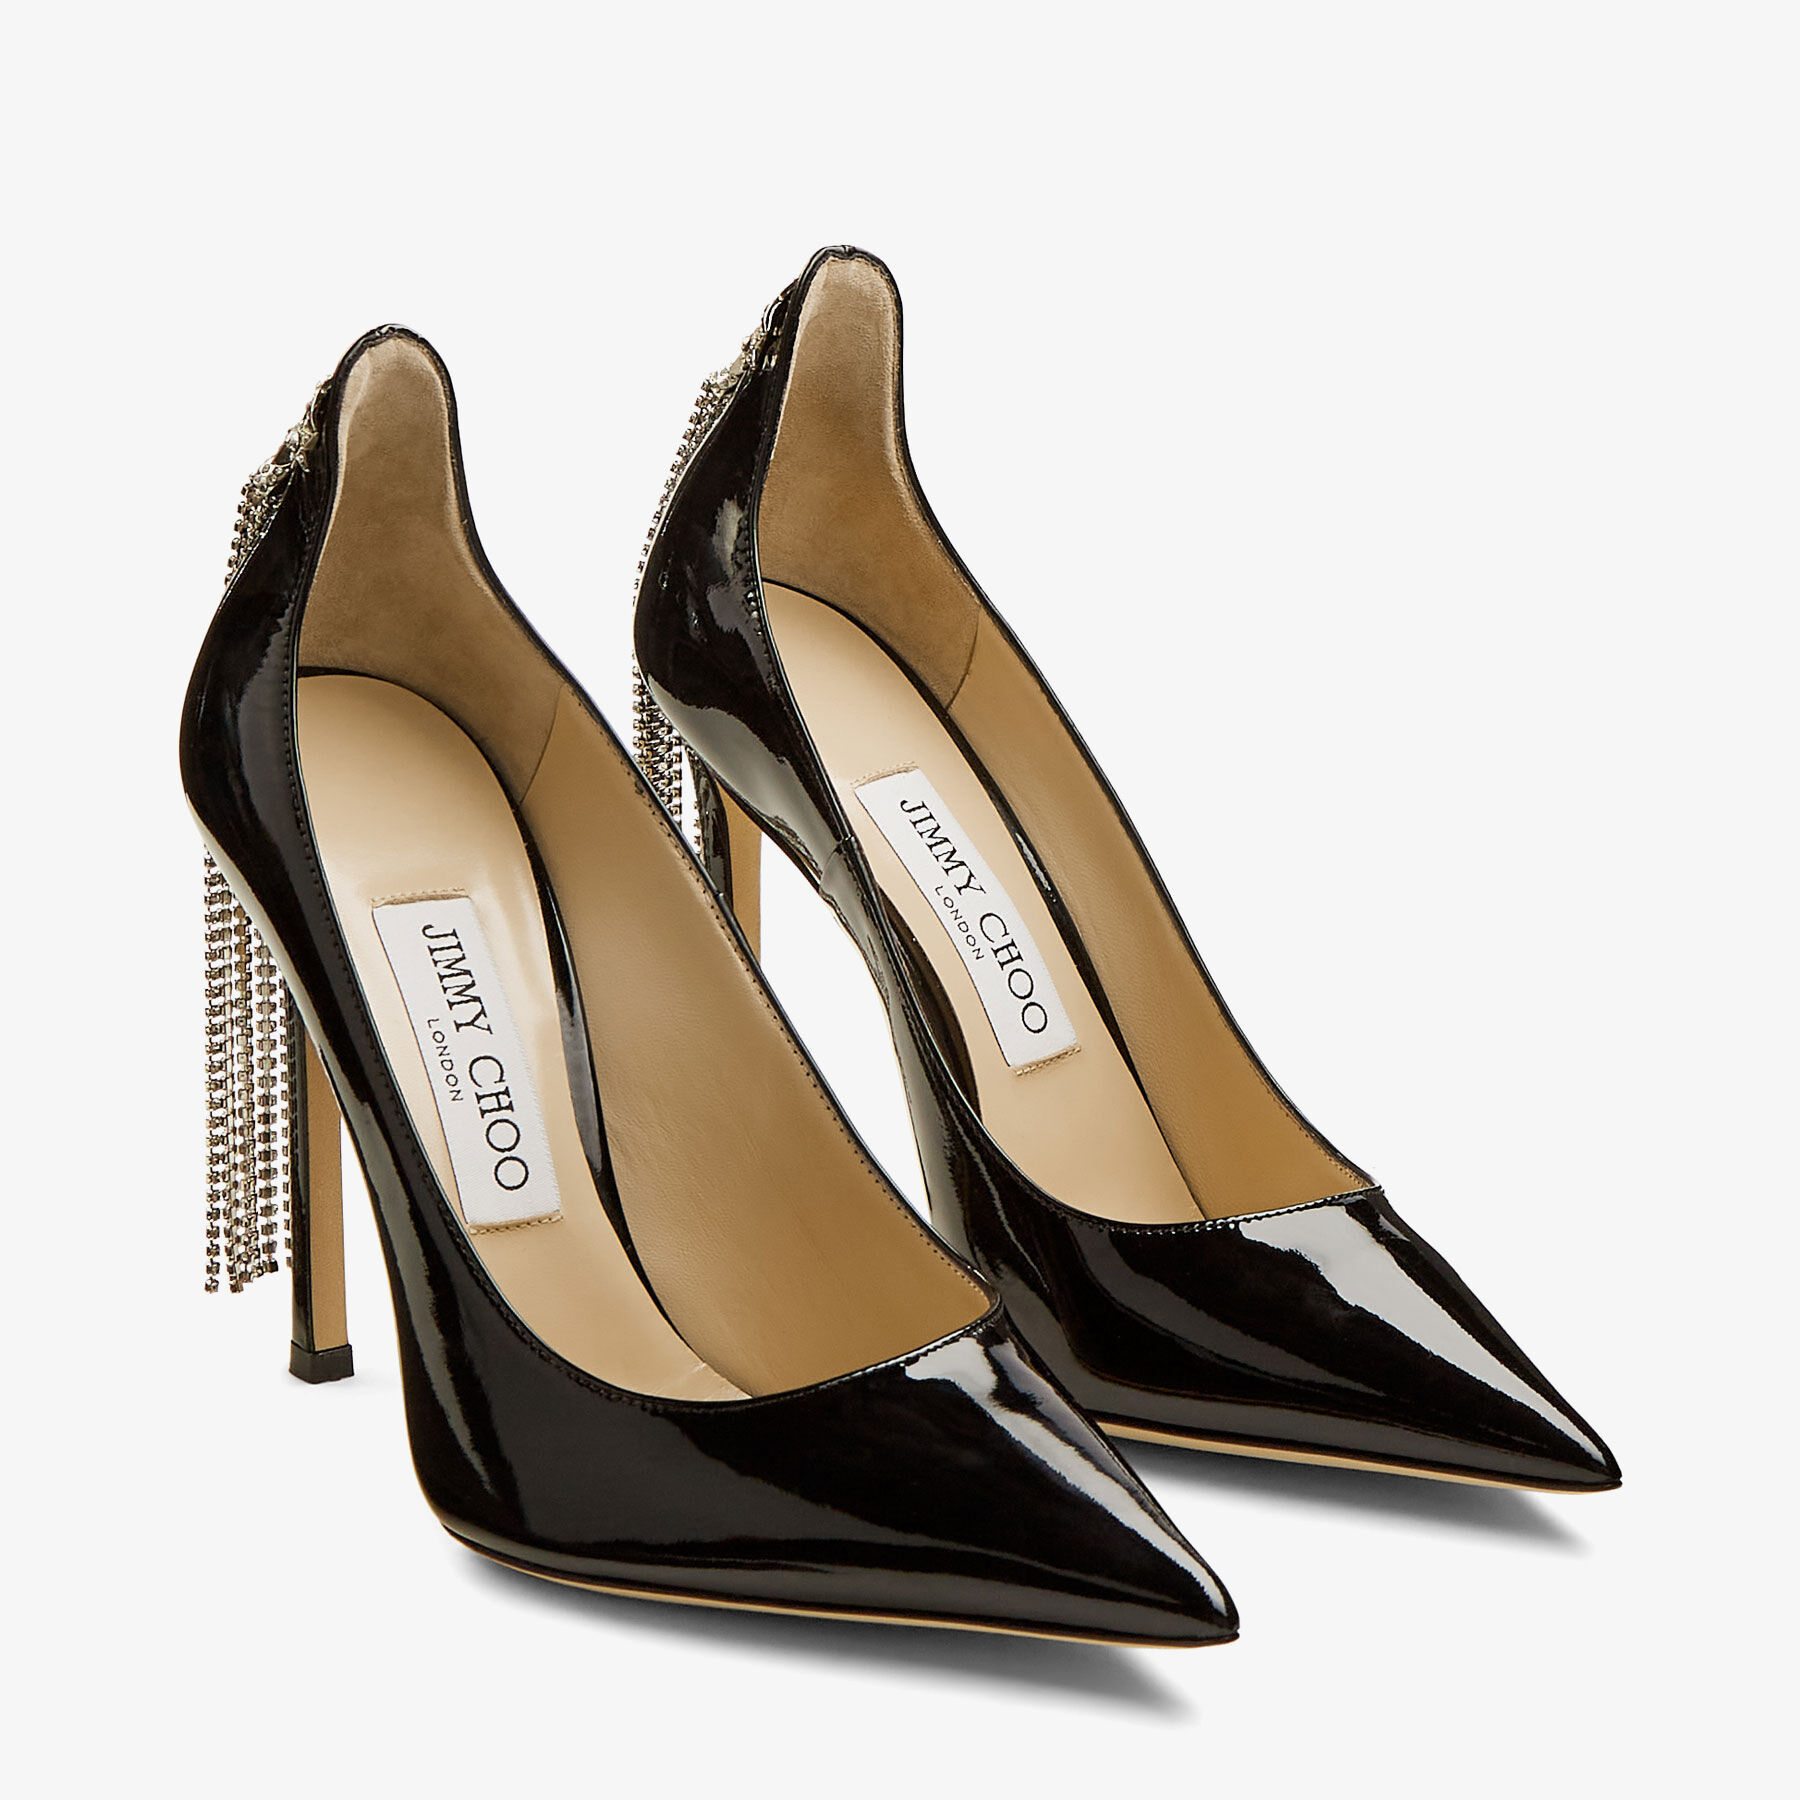 Black Soft Patent Pumps with Crystal Star Chandelier Accessory | SPRUCE ...